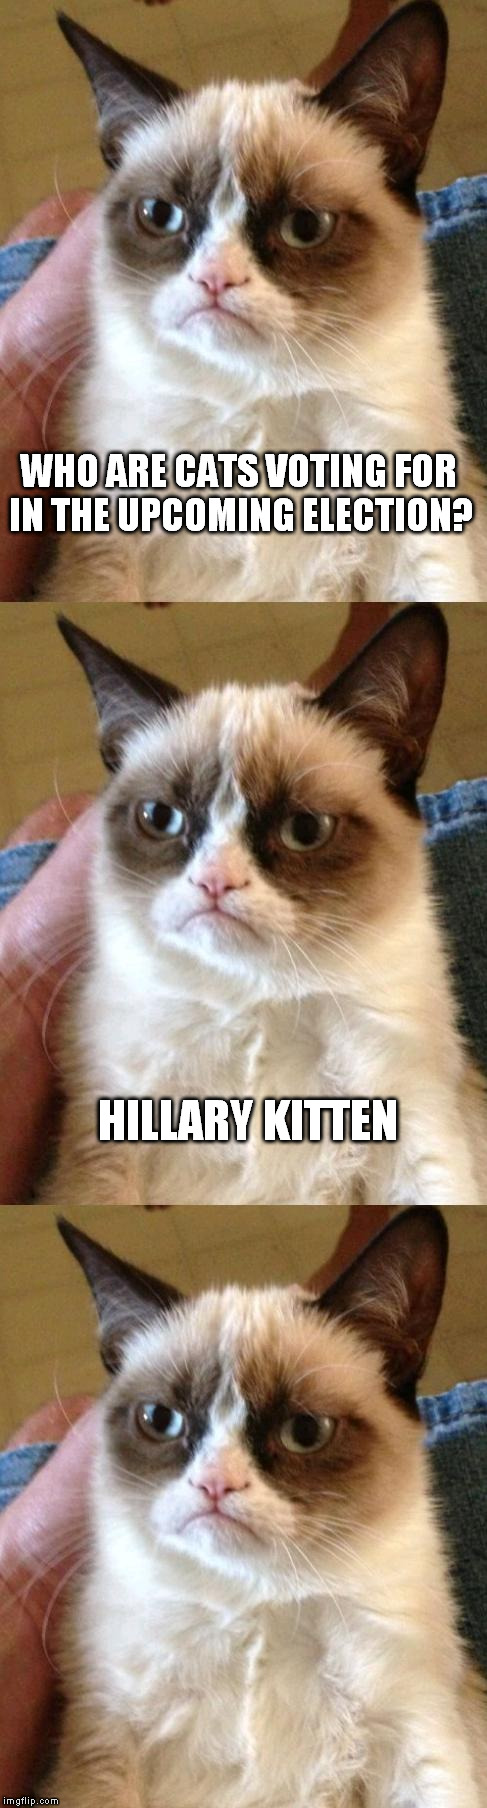 bad pun grumpy cat | WHO ARE CATS VOTING FOR IN THE UPCOMING ELECTION? HILLARY KITTEN | image tagged in grumpy cat,bad pun | made w/ Imgflip meme maker